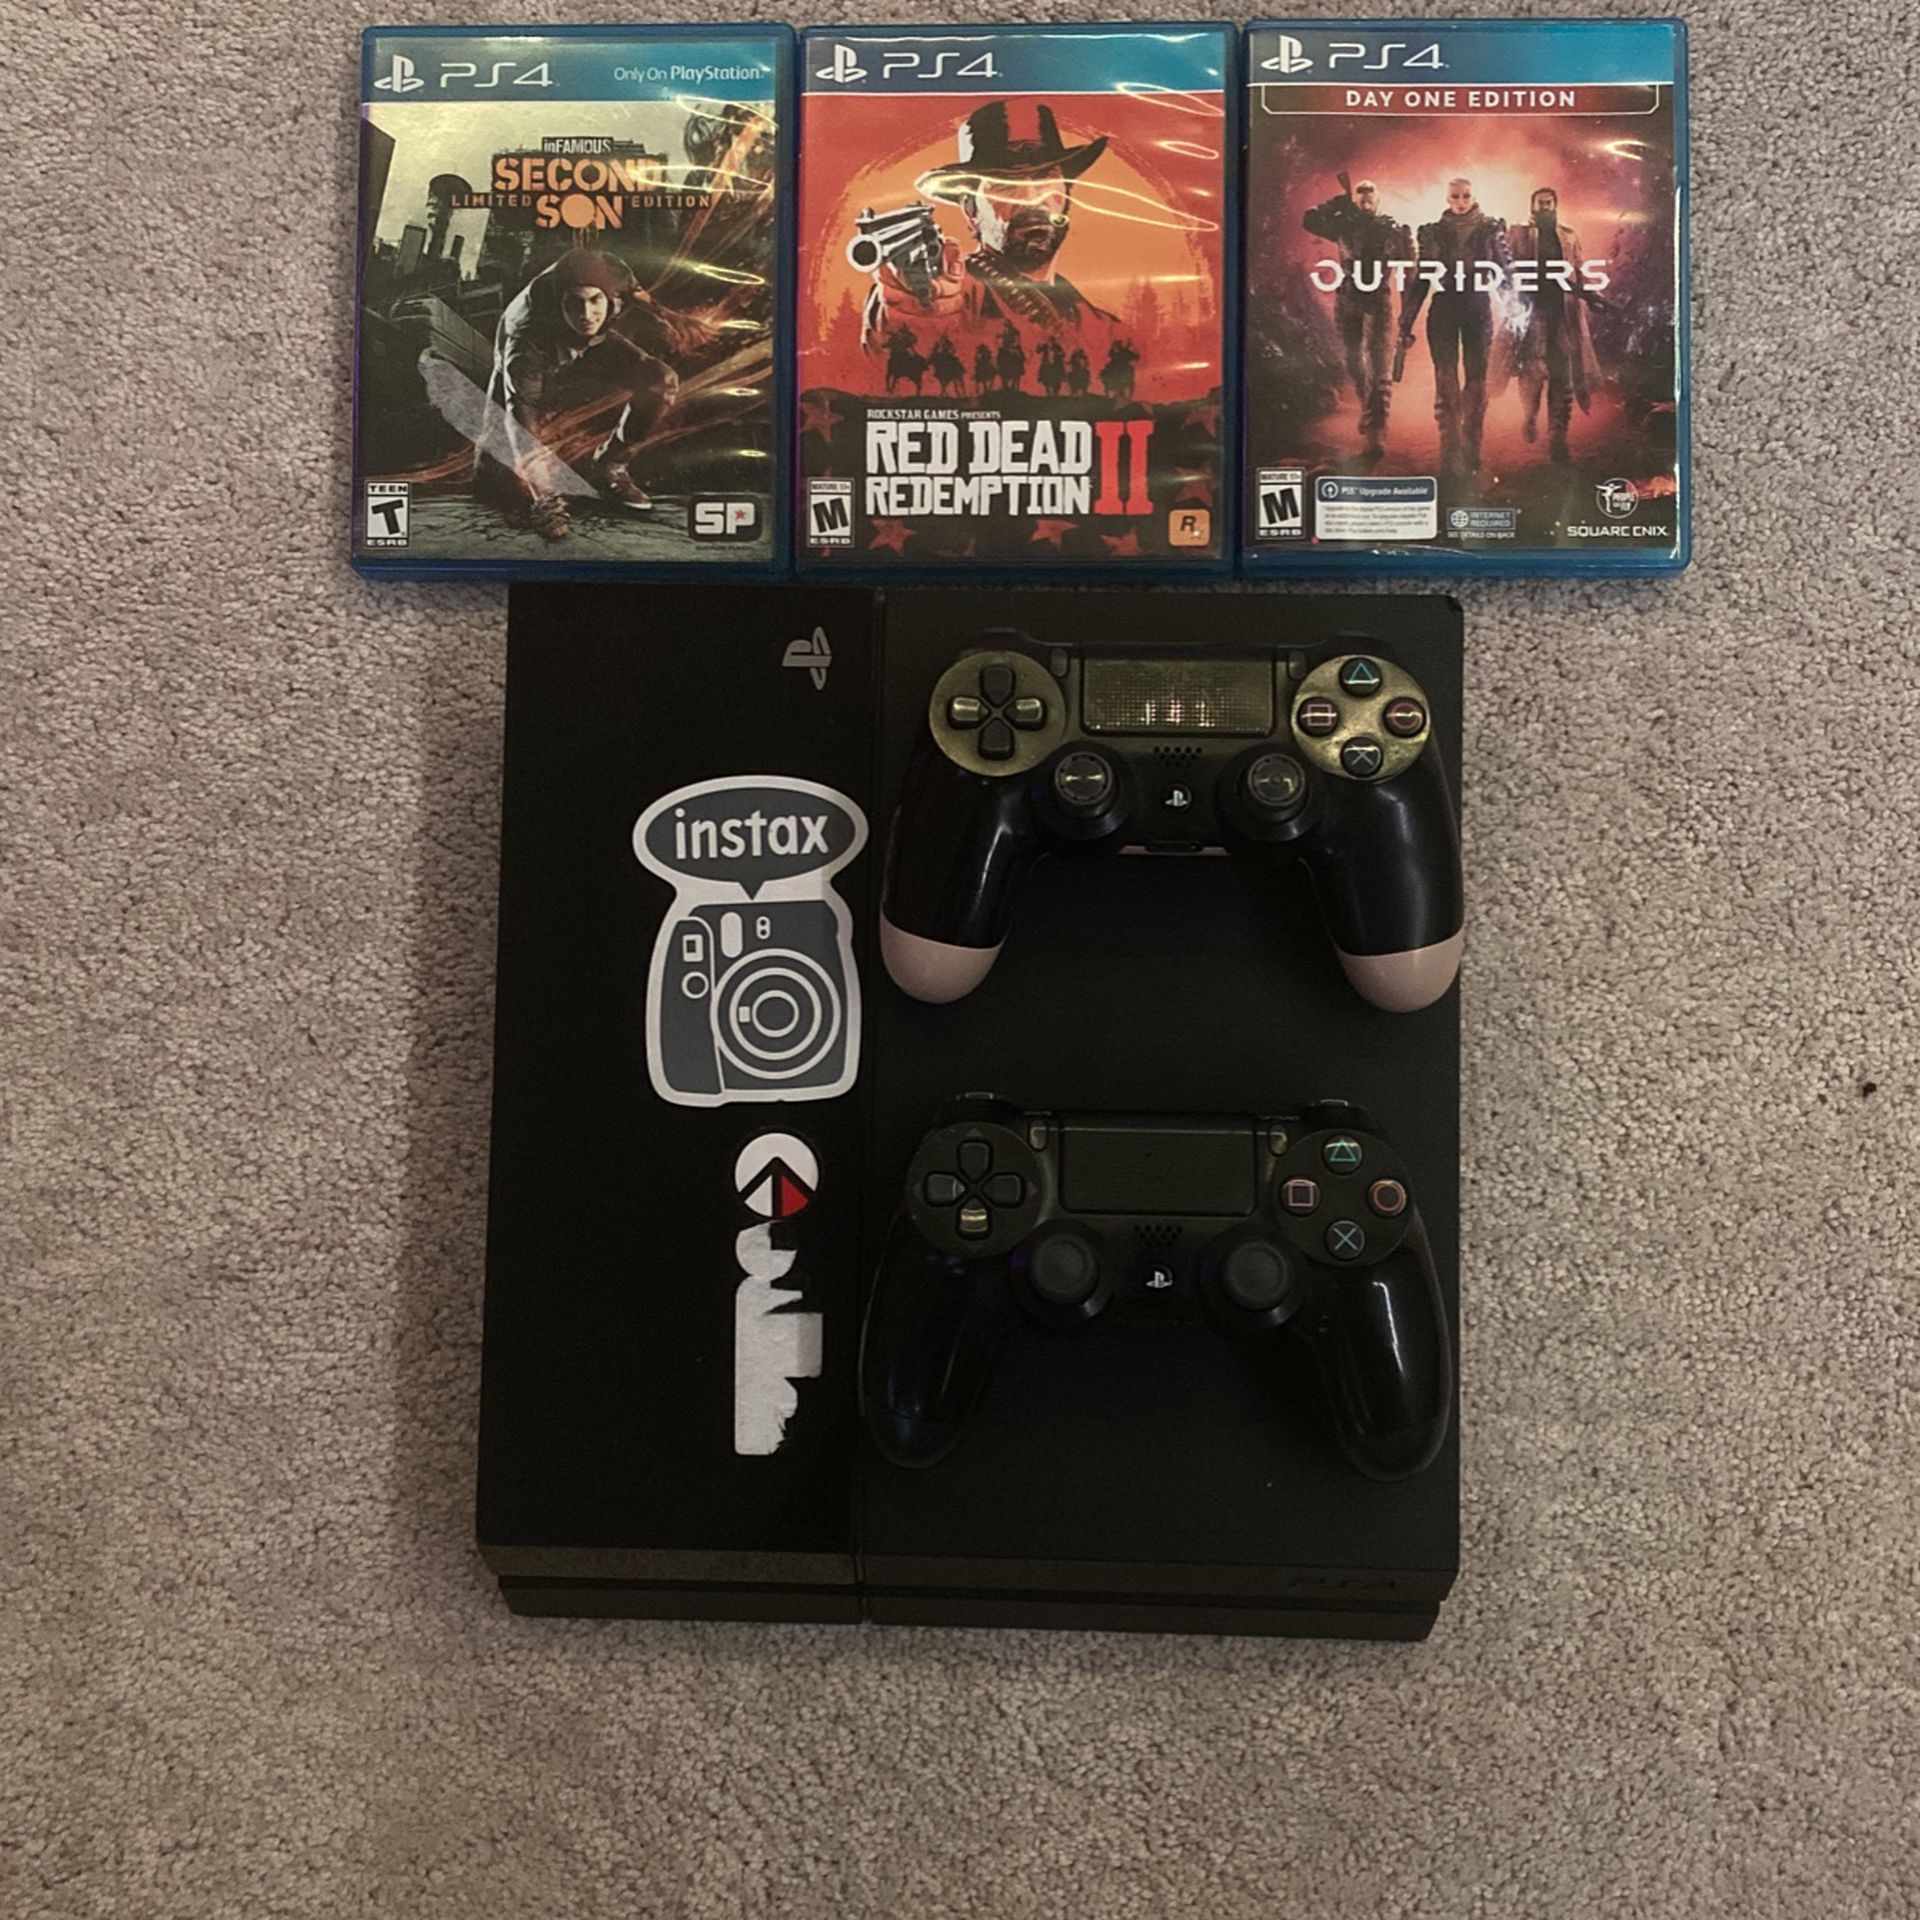 Playstation 4  (PS4) bundle with 3 games and two controllers and power cable (no HMDI)  Games: -Red Dead Redemption 2 -Outriders  -Infamous  